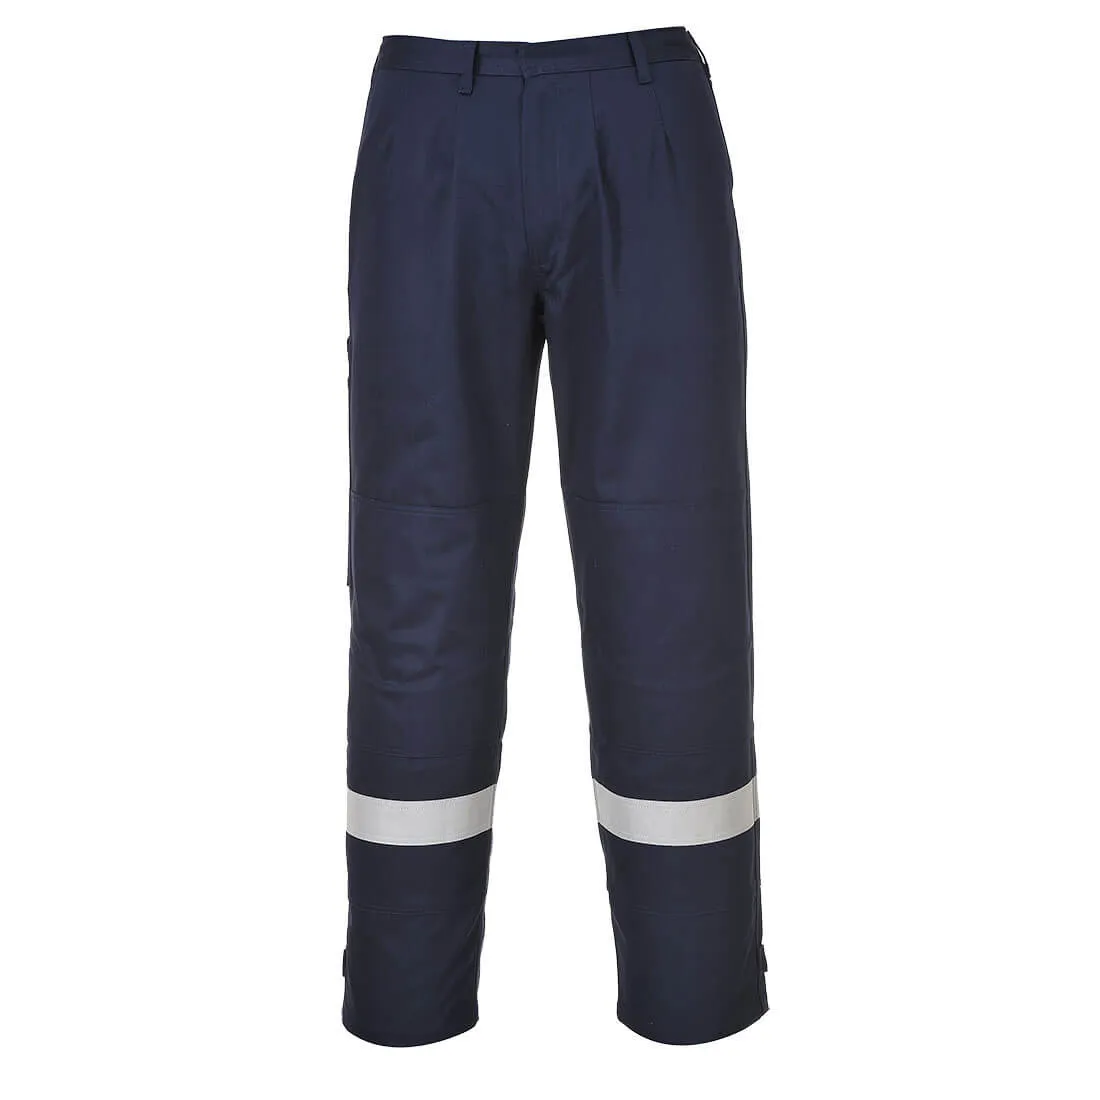 Biz Flame Plus Mens Flame Resistant Trousers - Navy Blue, Extra Large, 34"